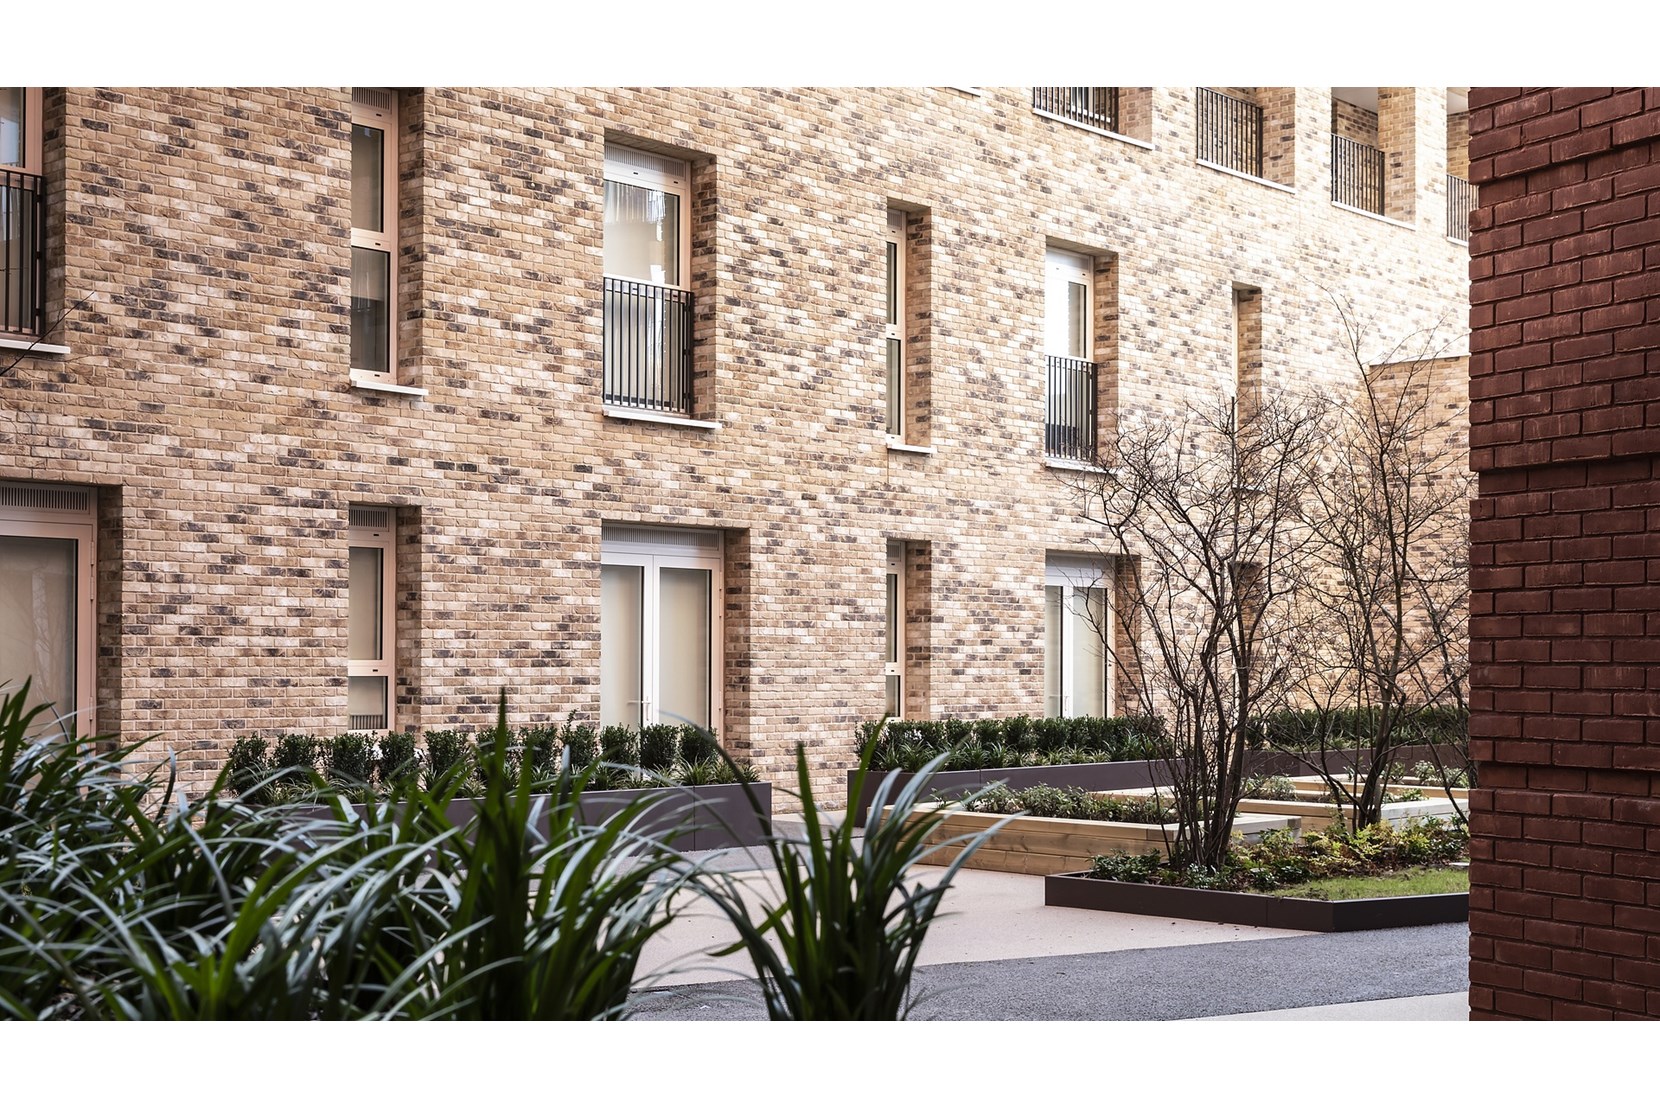 Apartments to Rent by a2dominion at Keybridge, Lambeth, SW8, communal gardens